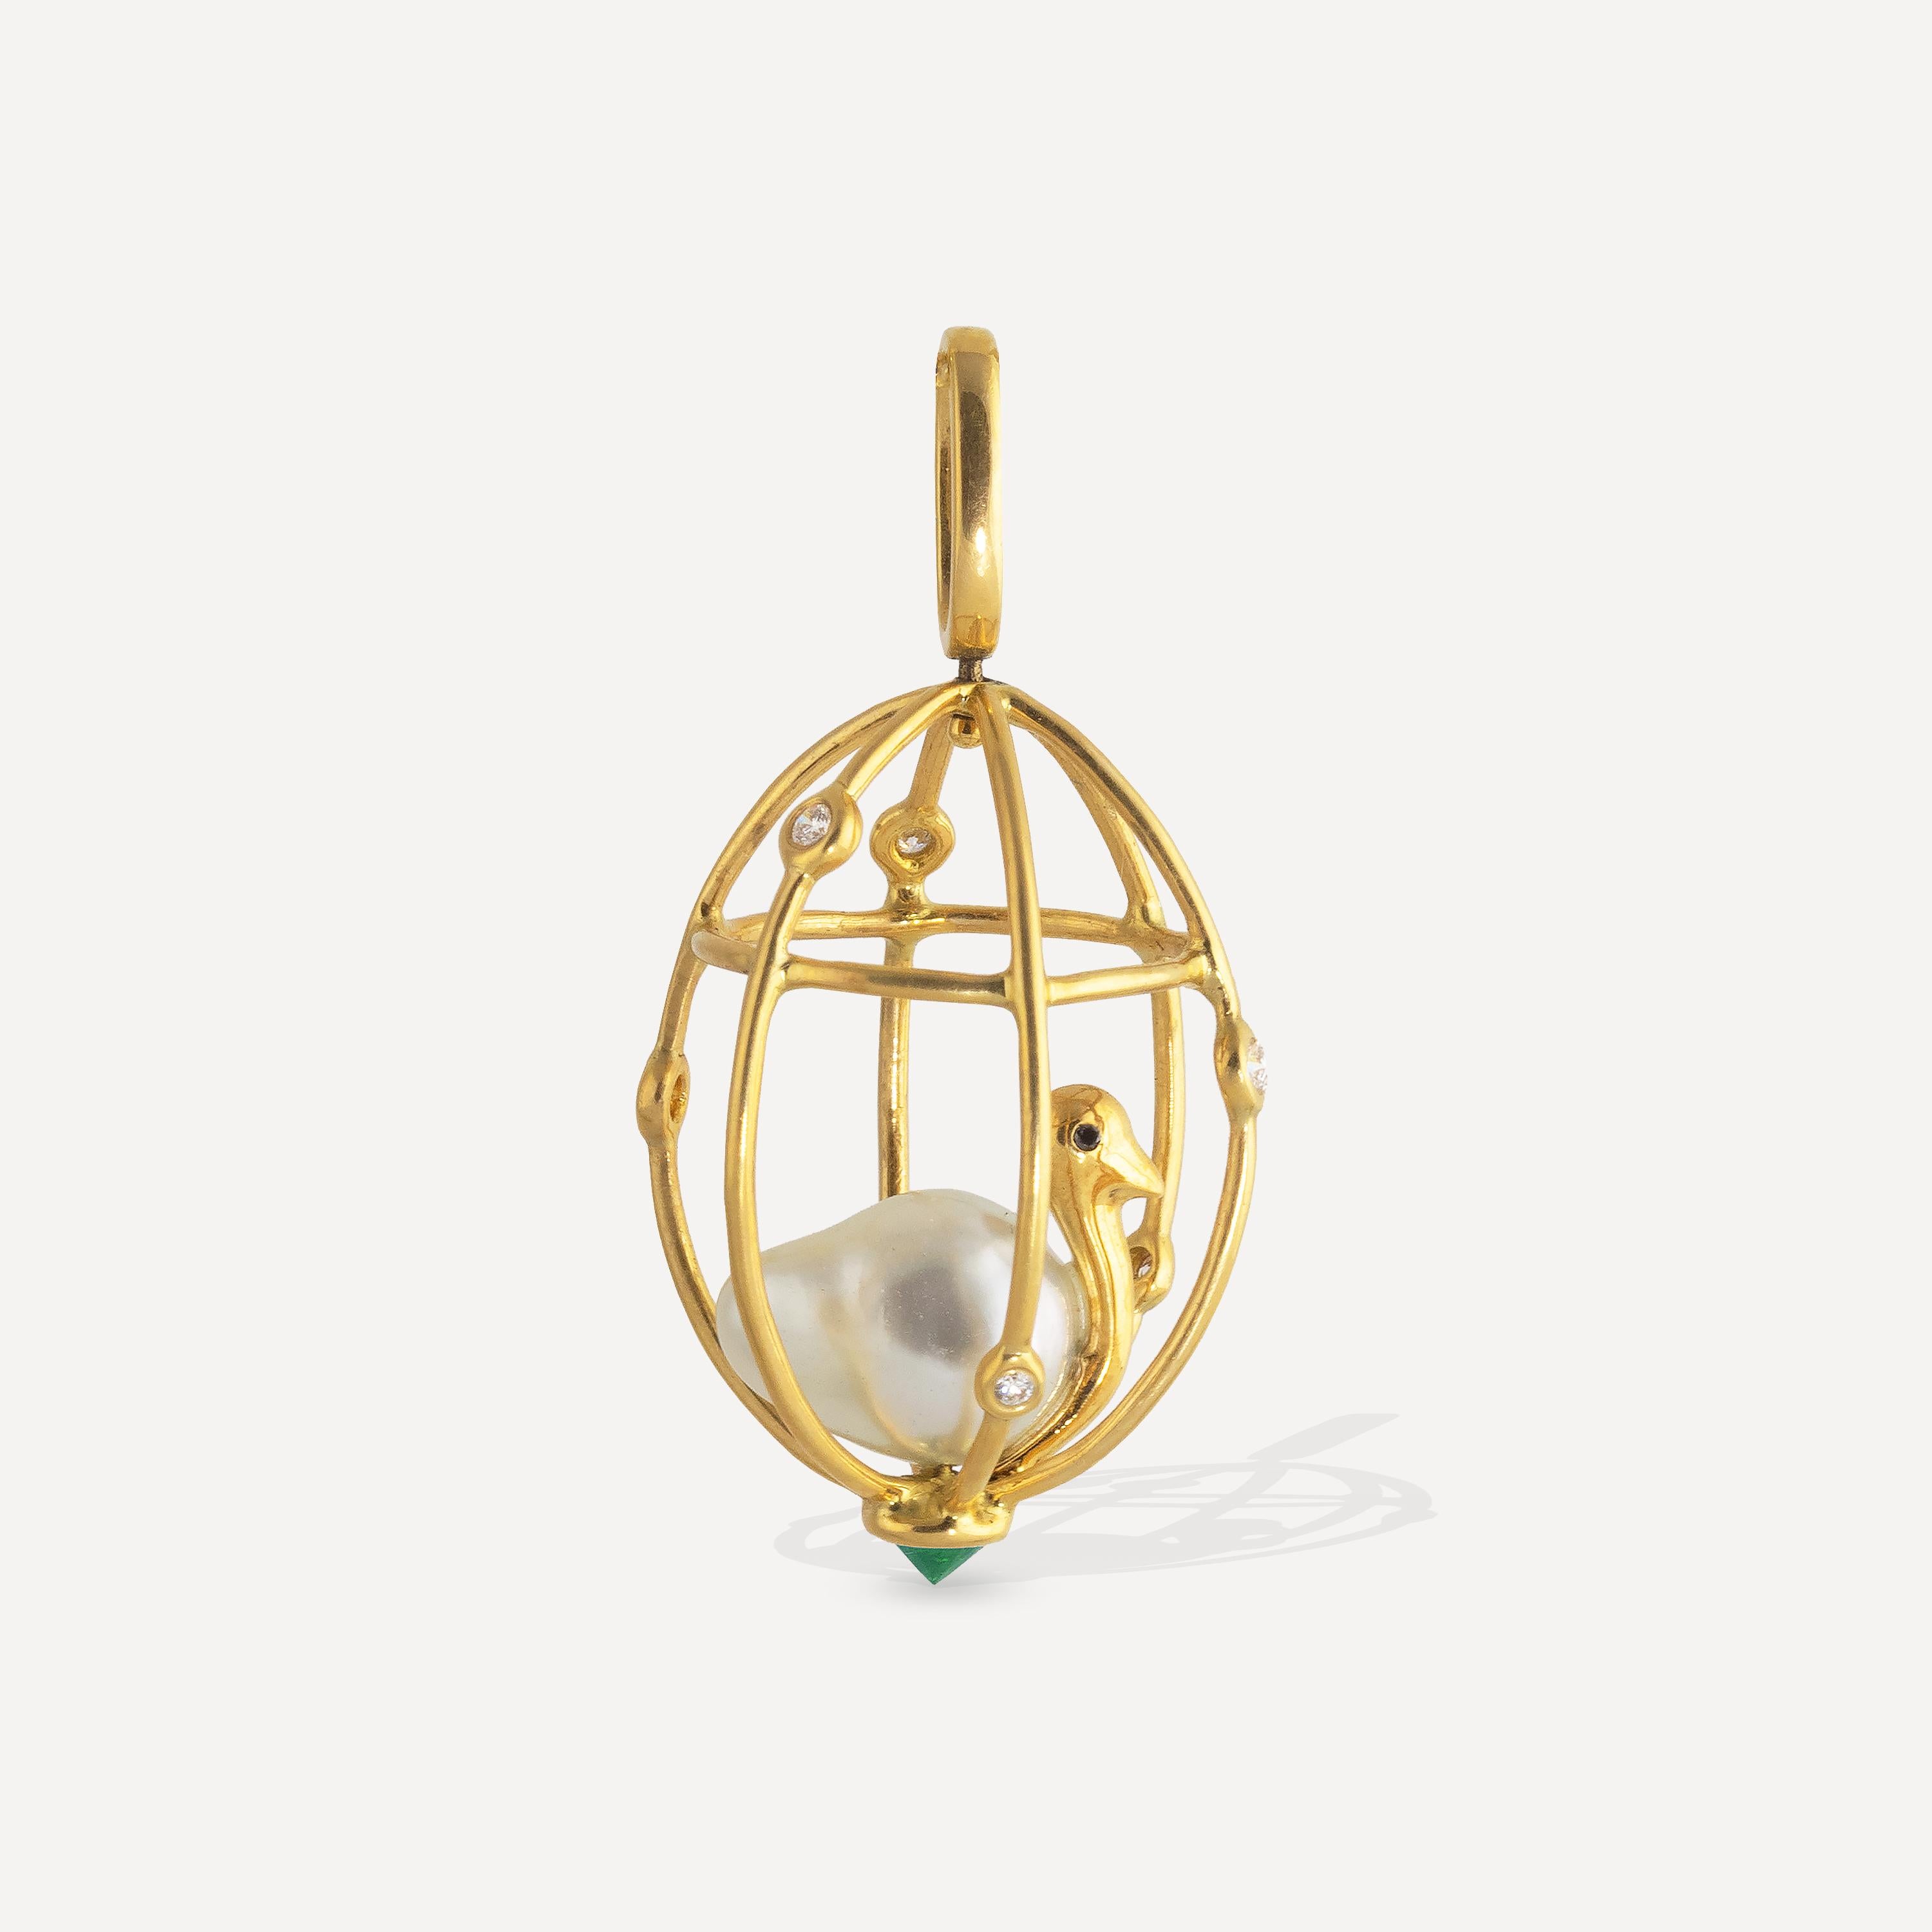 Perched inside this 18k diamond studded cage is a delicate bird; its body made from a 12mm x 9mm Baroque pearl, black diamond eyes decorating its golden body. The pendant features a reverse set .30 carat green tsavorite  at the bottom of the cage